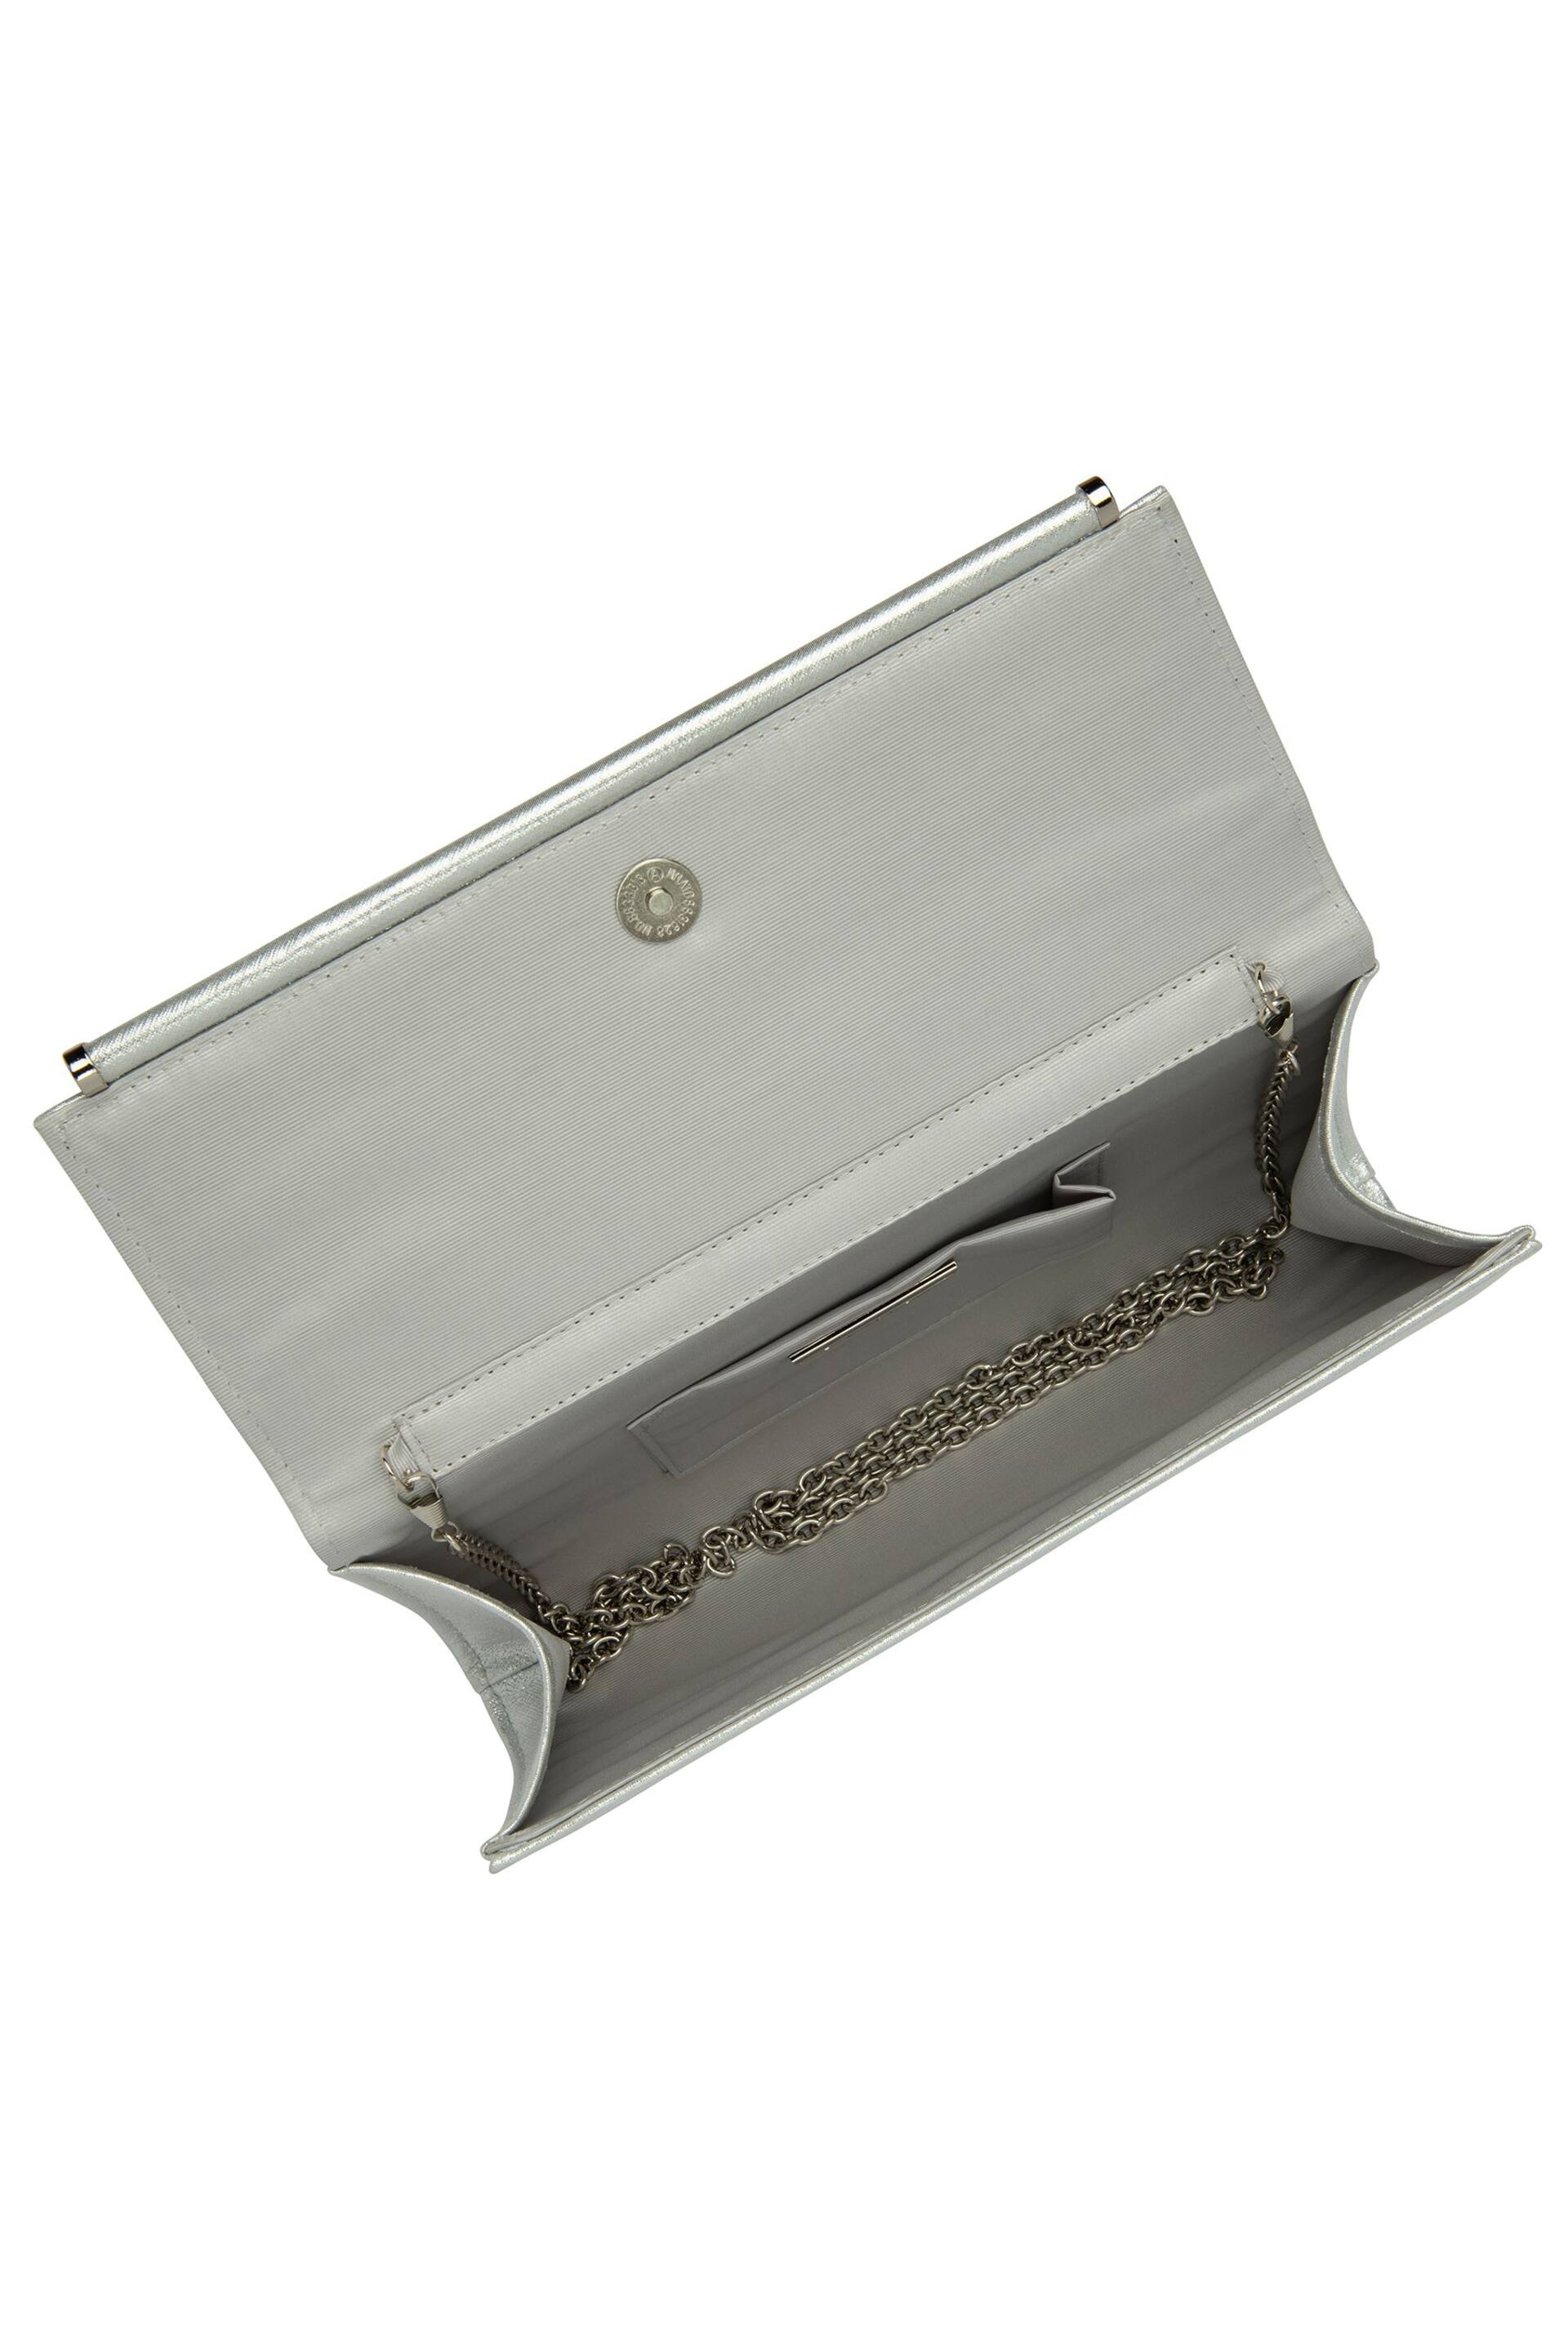 Lotus Silver Clutch Bag With Chain - Image 4 of 4